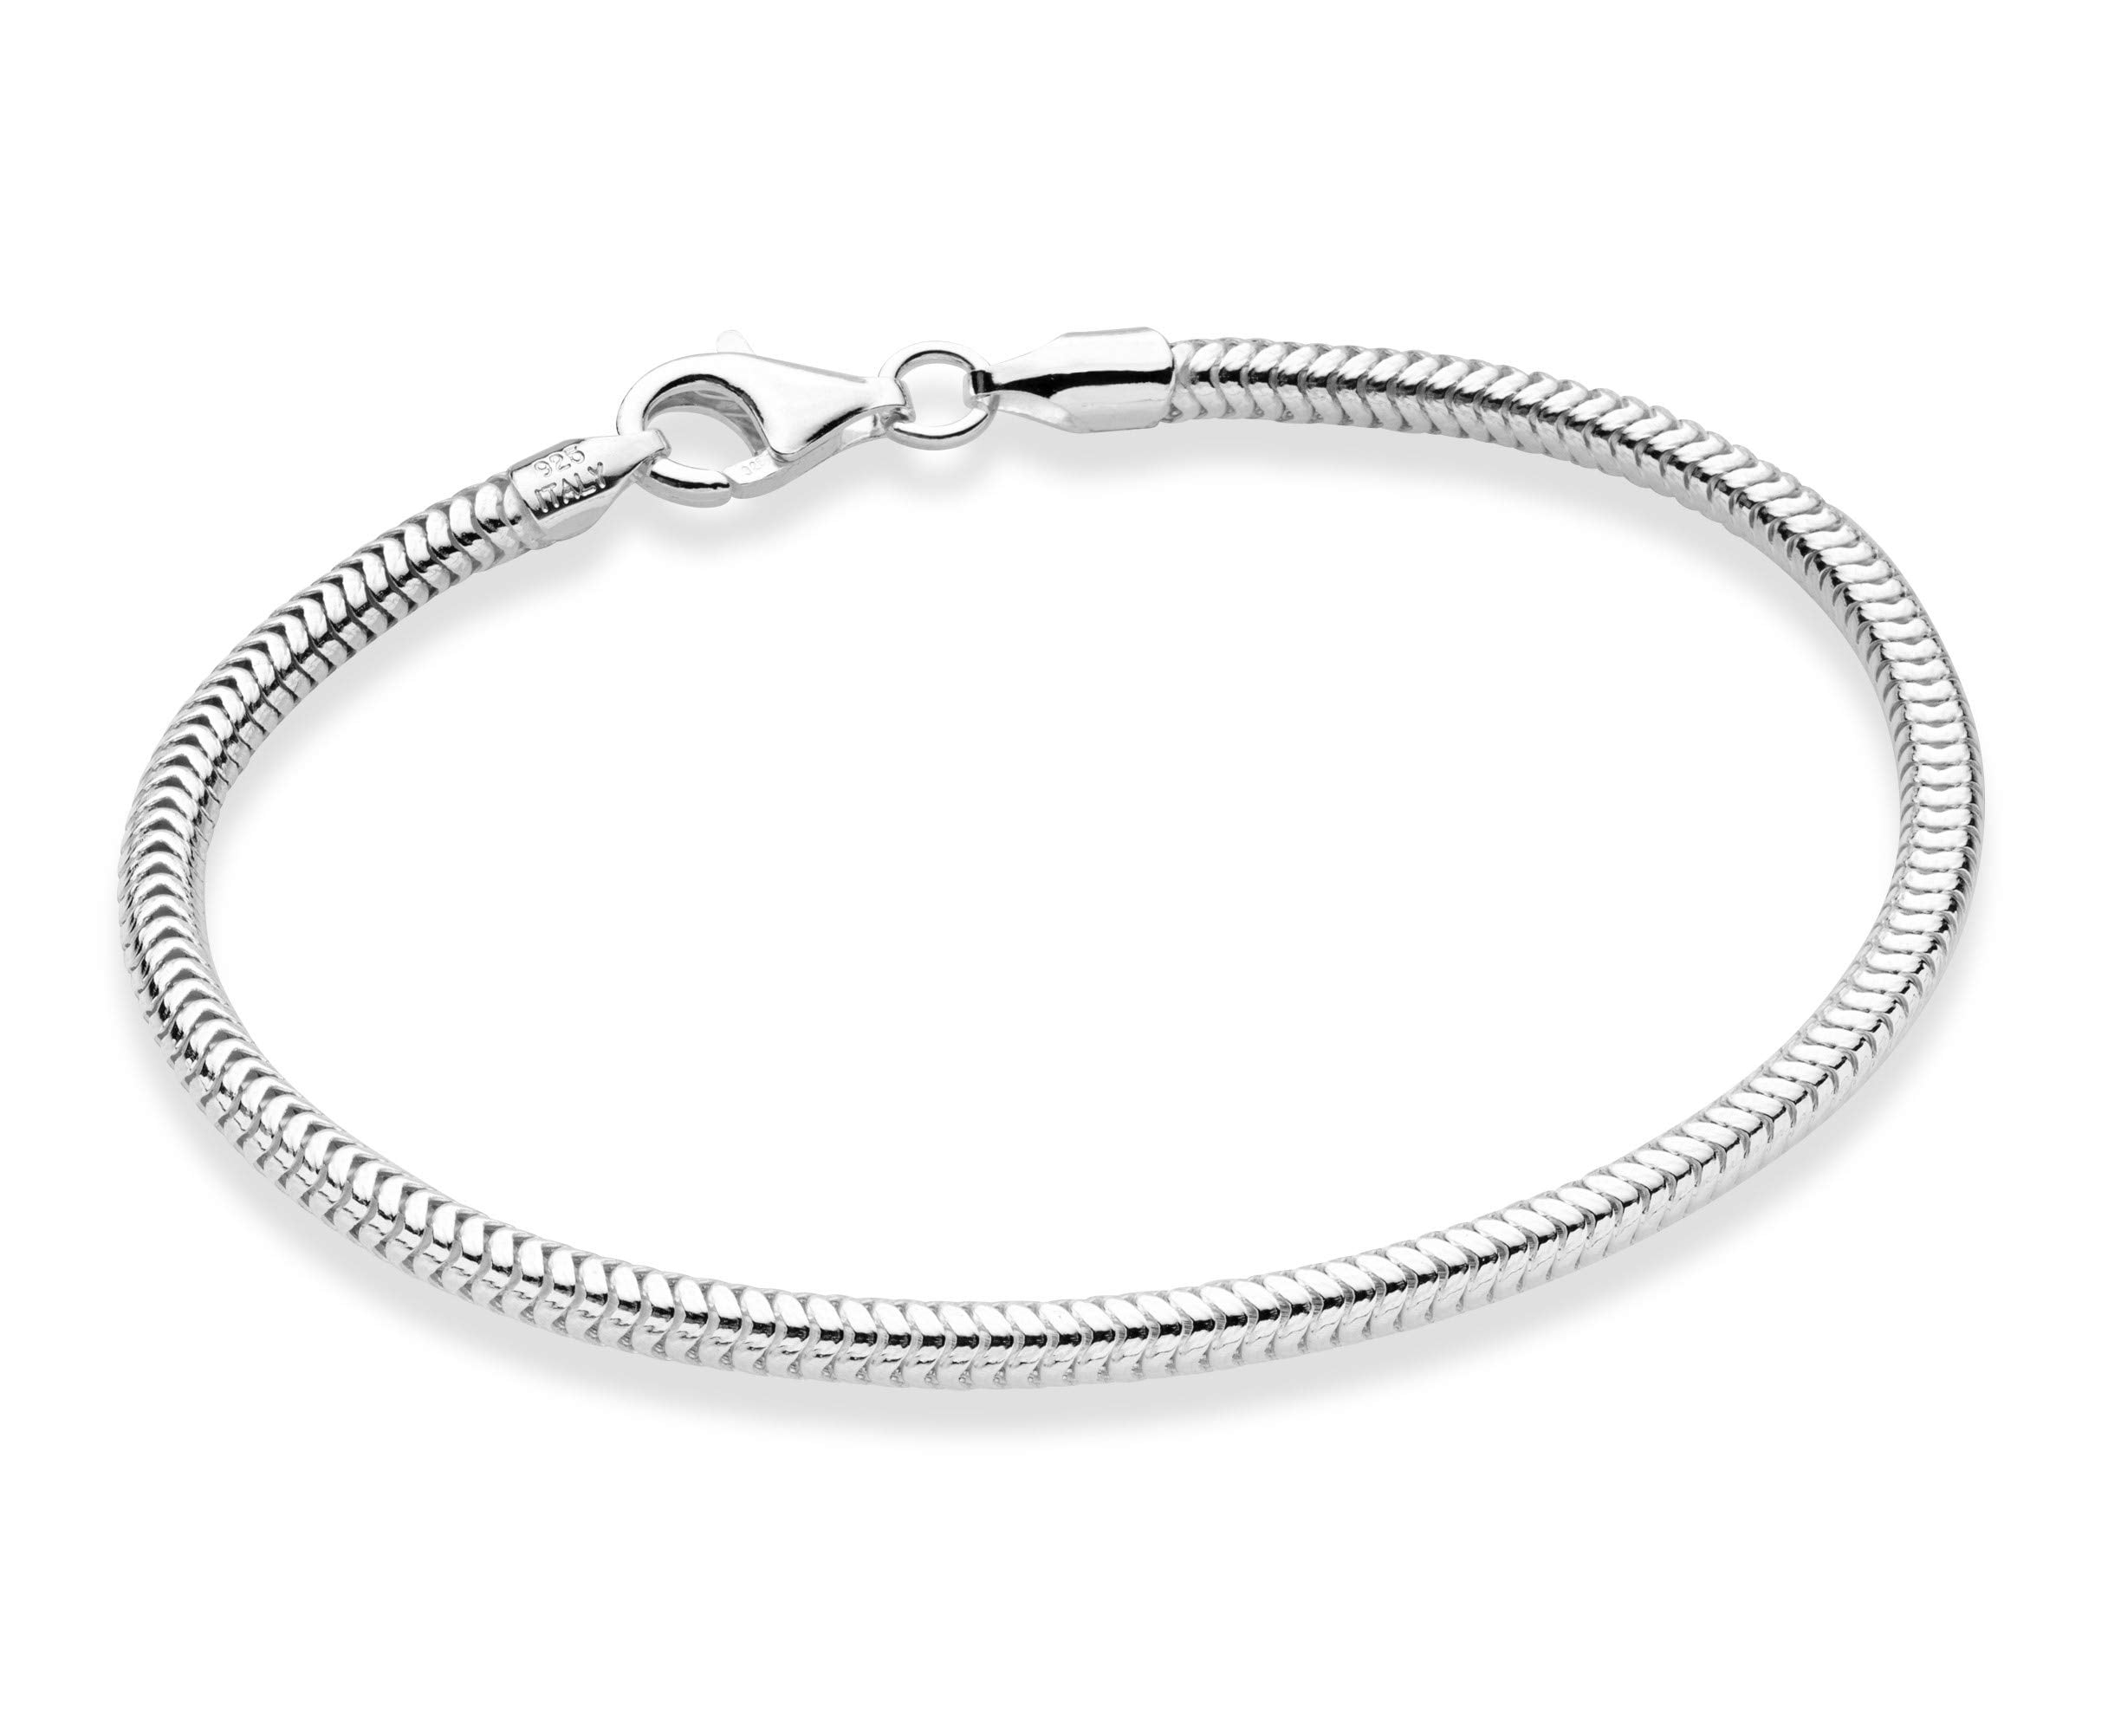 Snake Chain Silver Bracelet With Snap Clasp 2.5 Gauge 